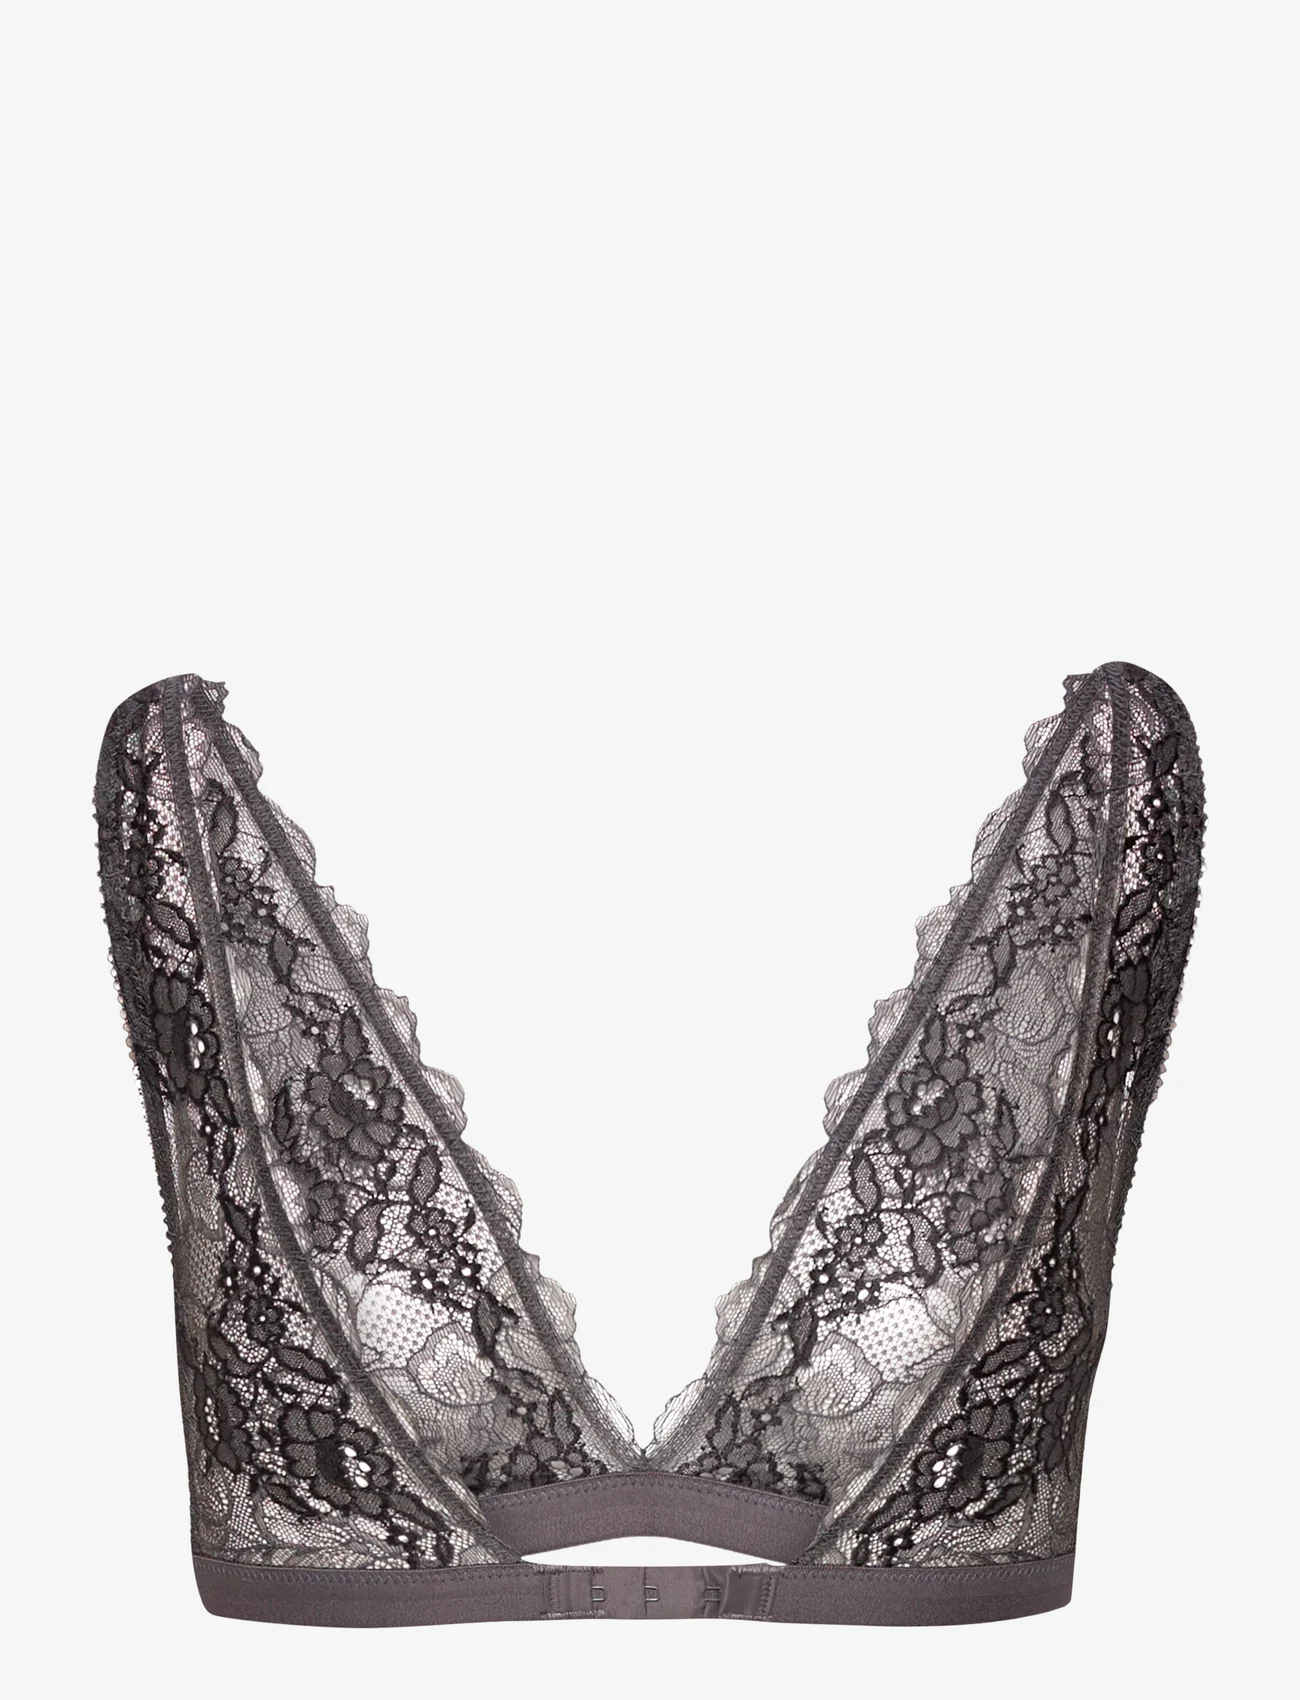 Wacoal - LACE PERFECTION - plunge bhs - charcoal - 1